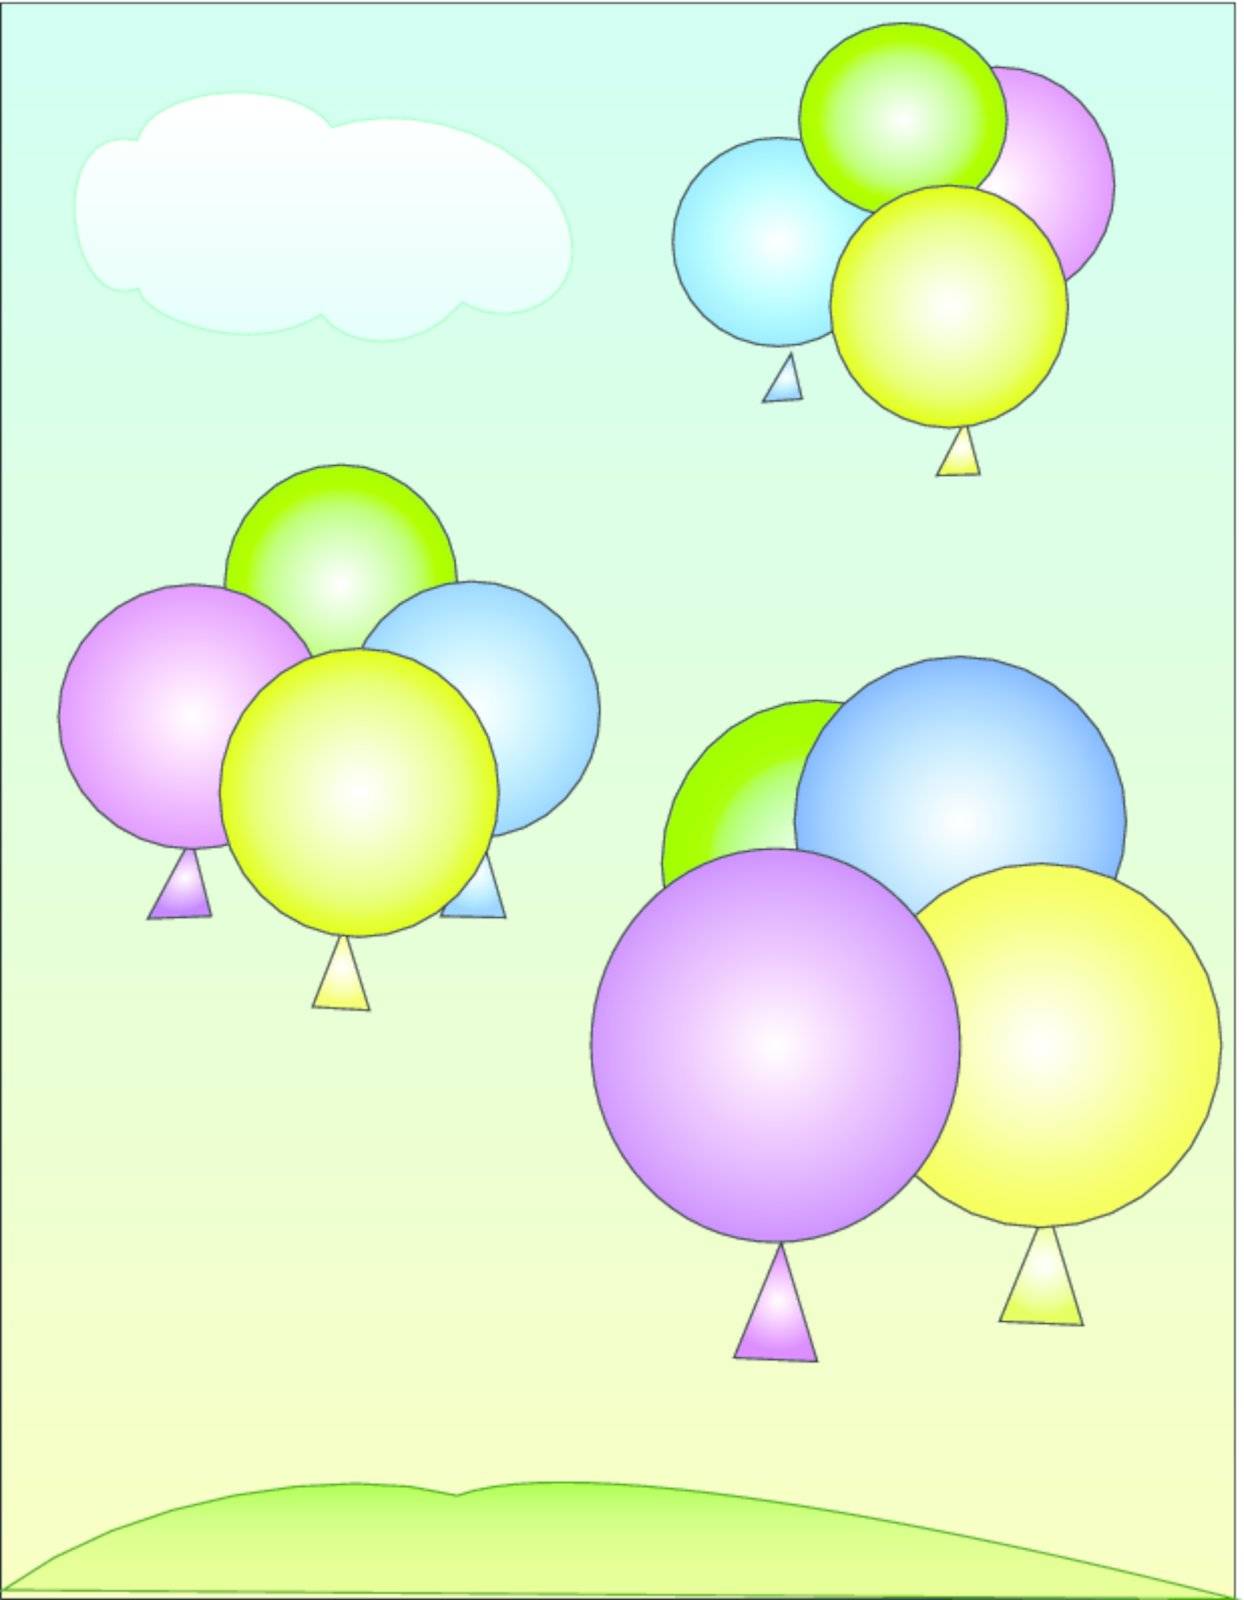 multi-colored balloons in the sky with a cloud. In the lower part vector illustration green lawn